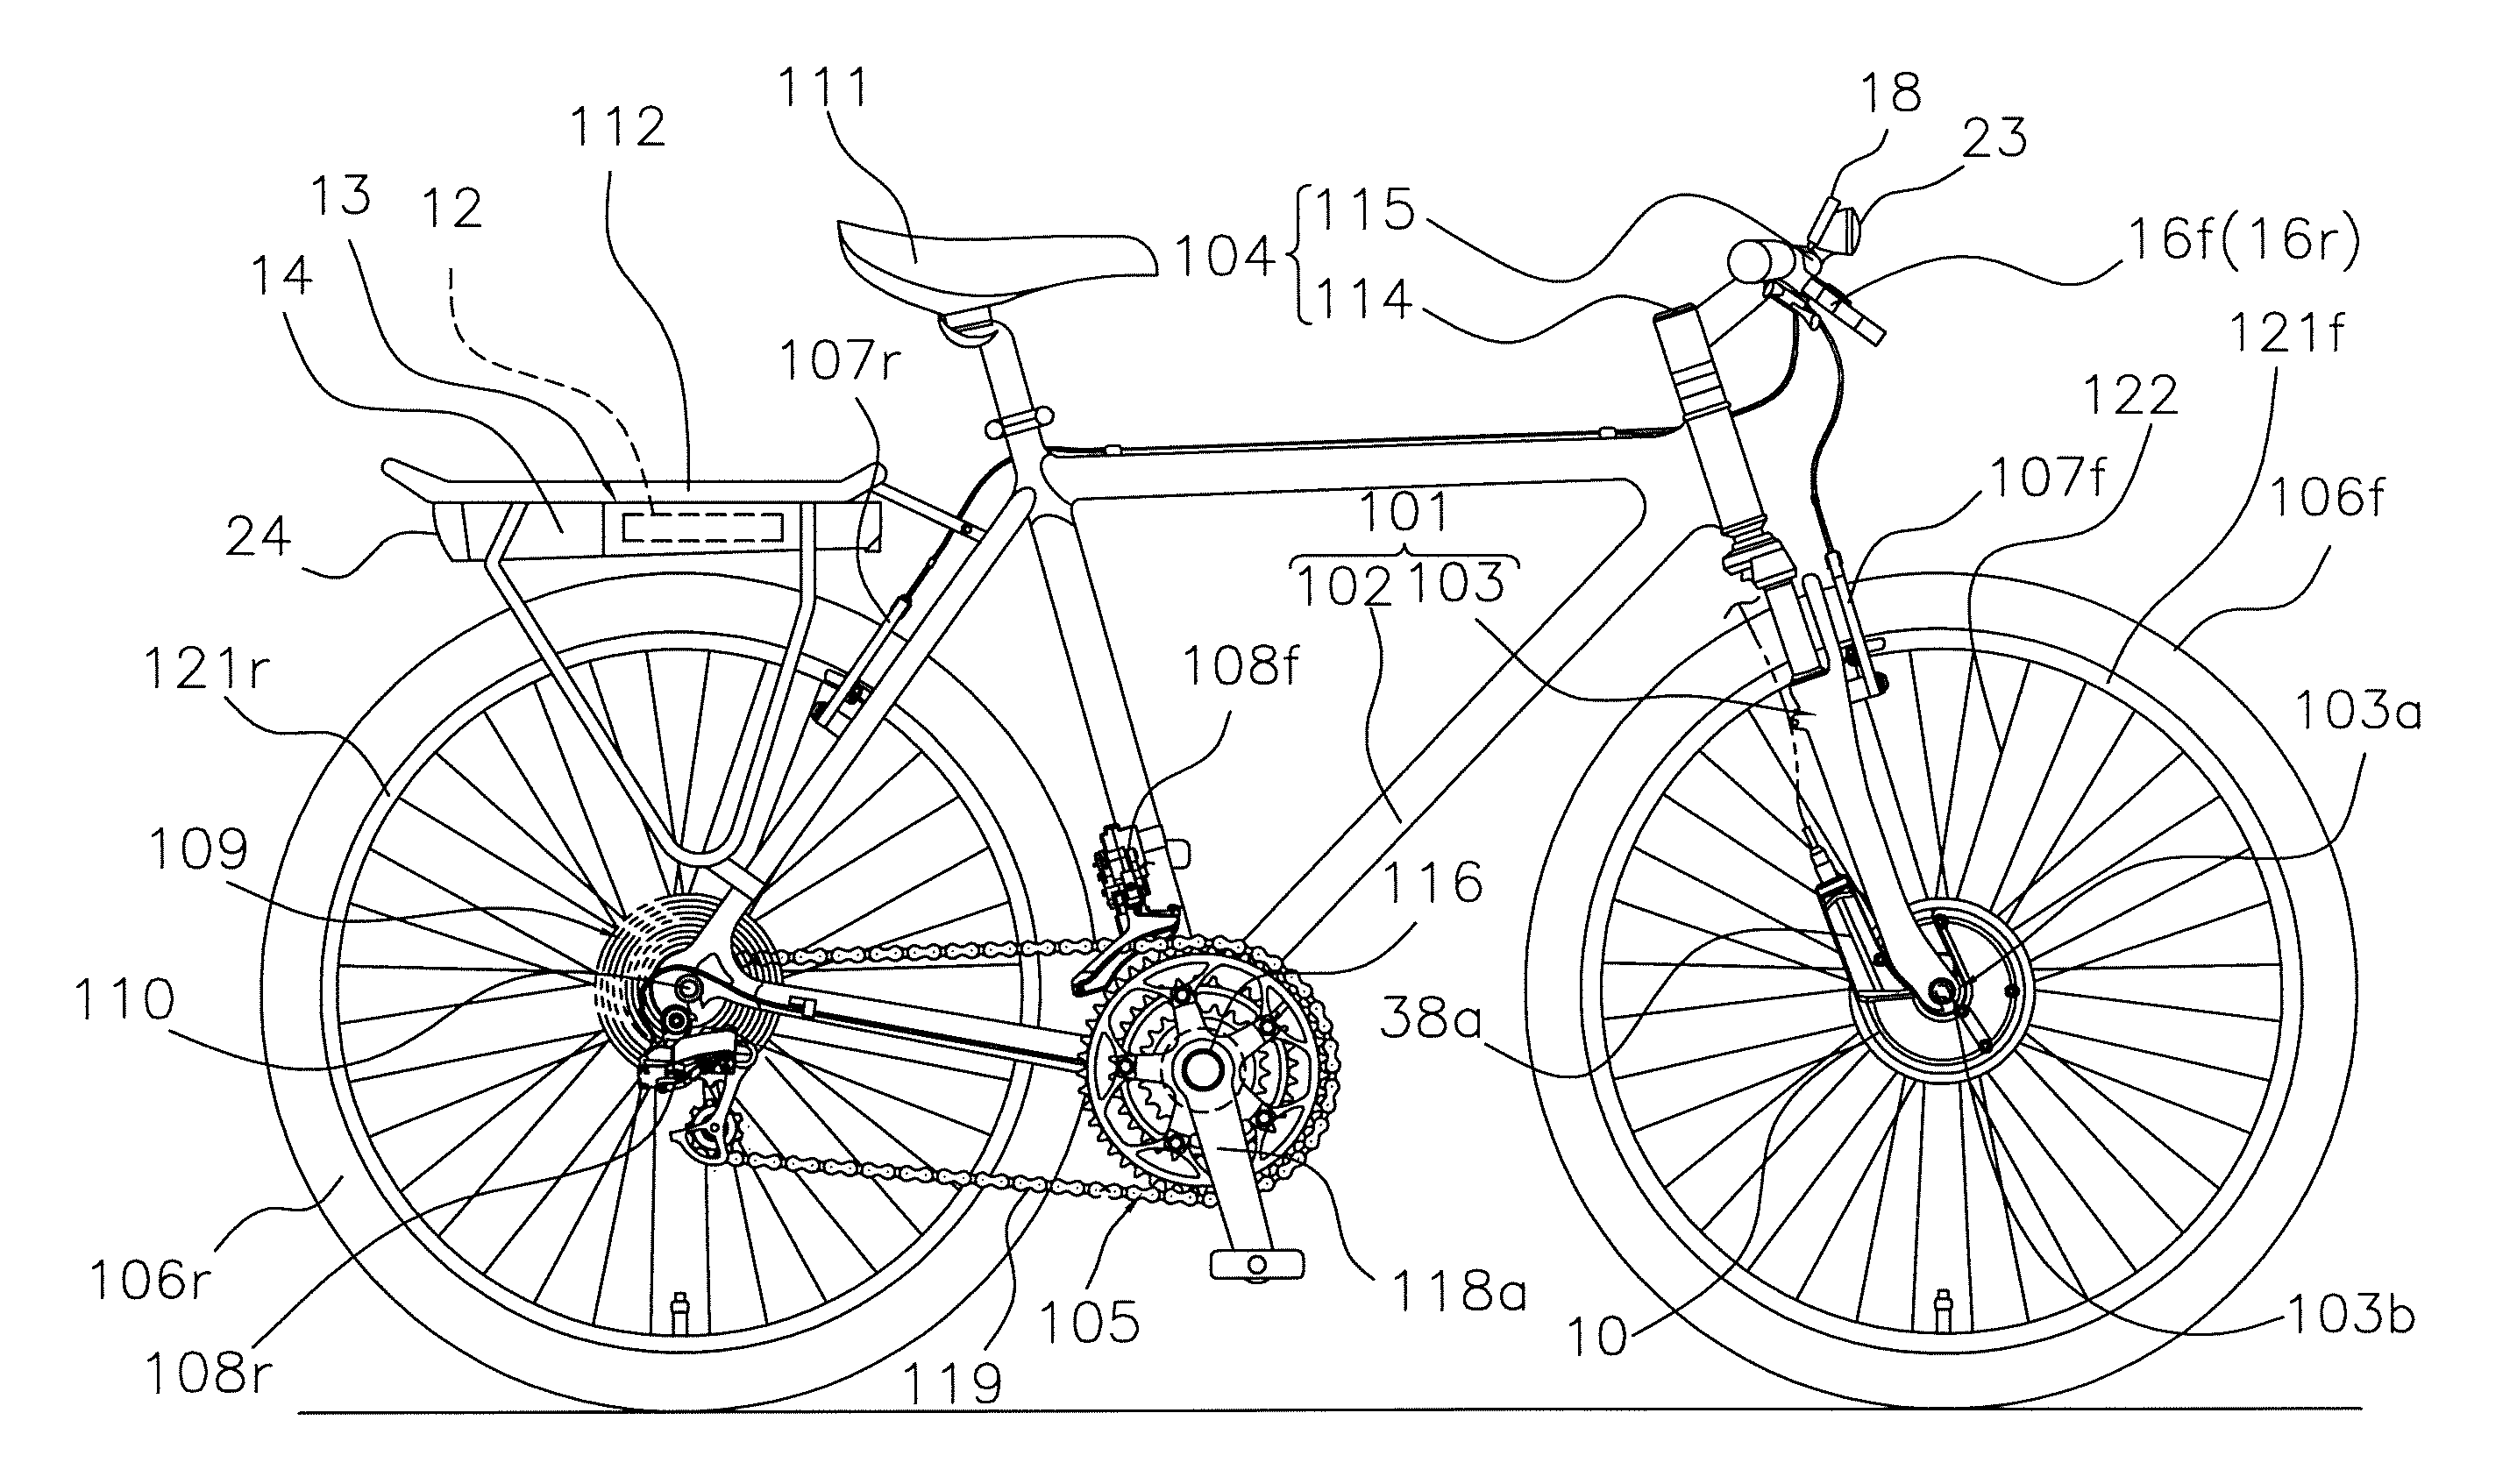 Bicycle motor control system